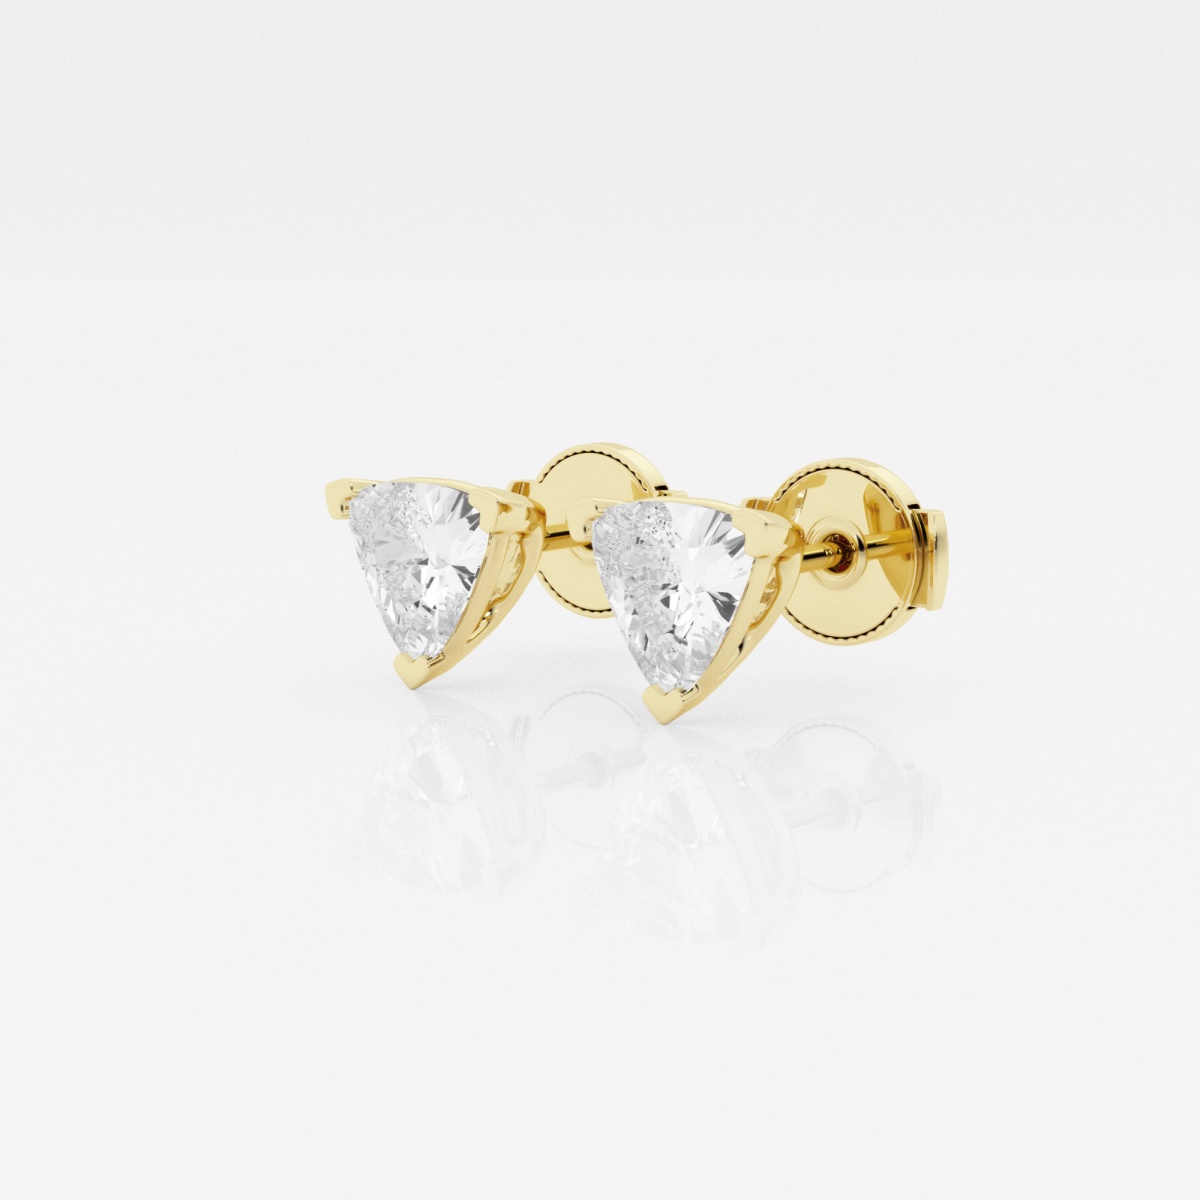 Additional Image 1 for  näas Ethereal 2 ctw Trillion Lab Grown Diamond Certified Stud Earrings